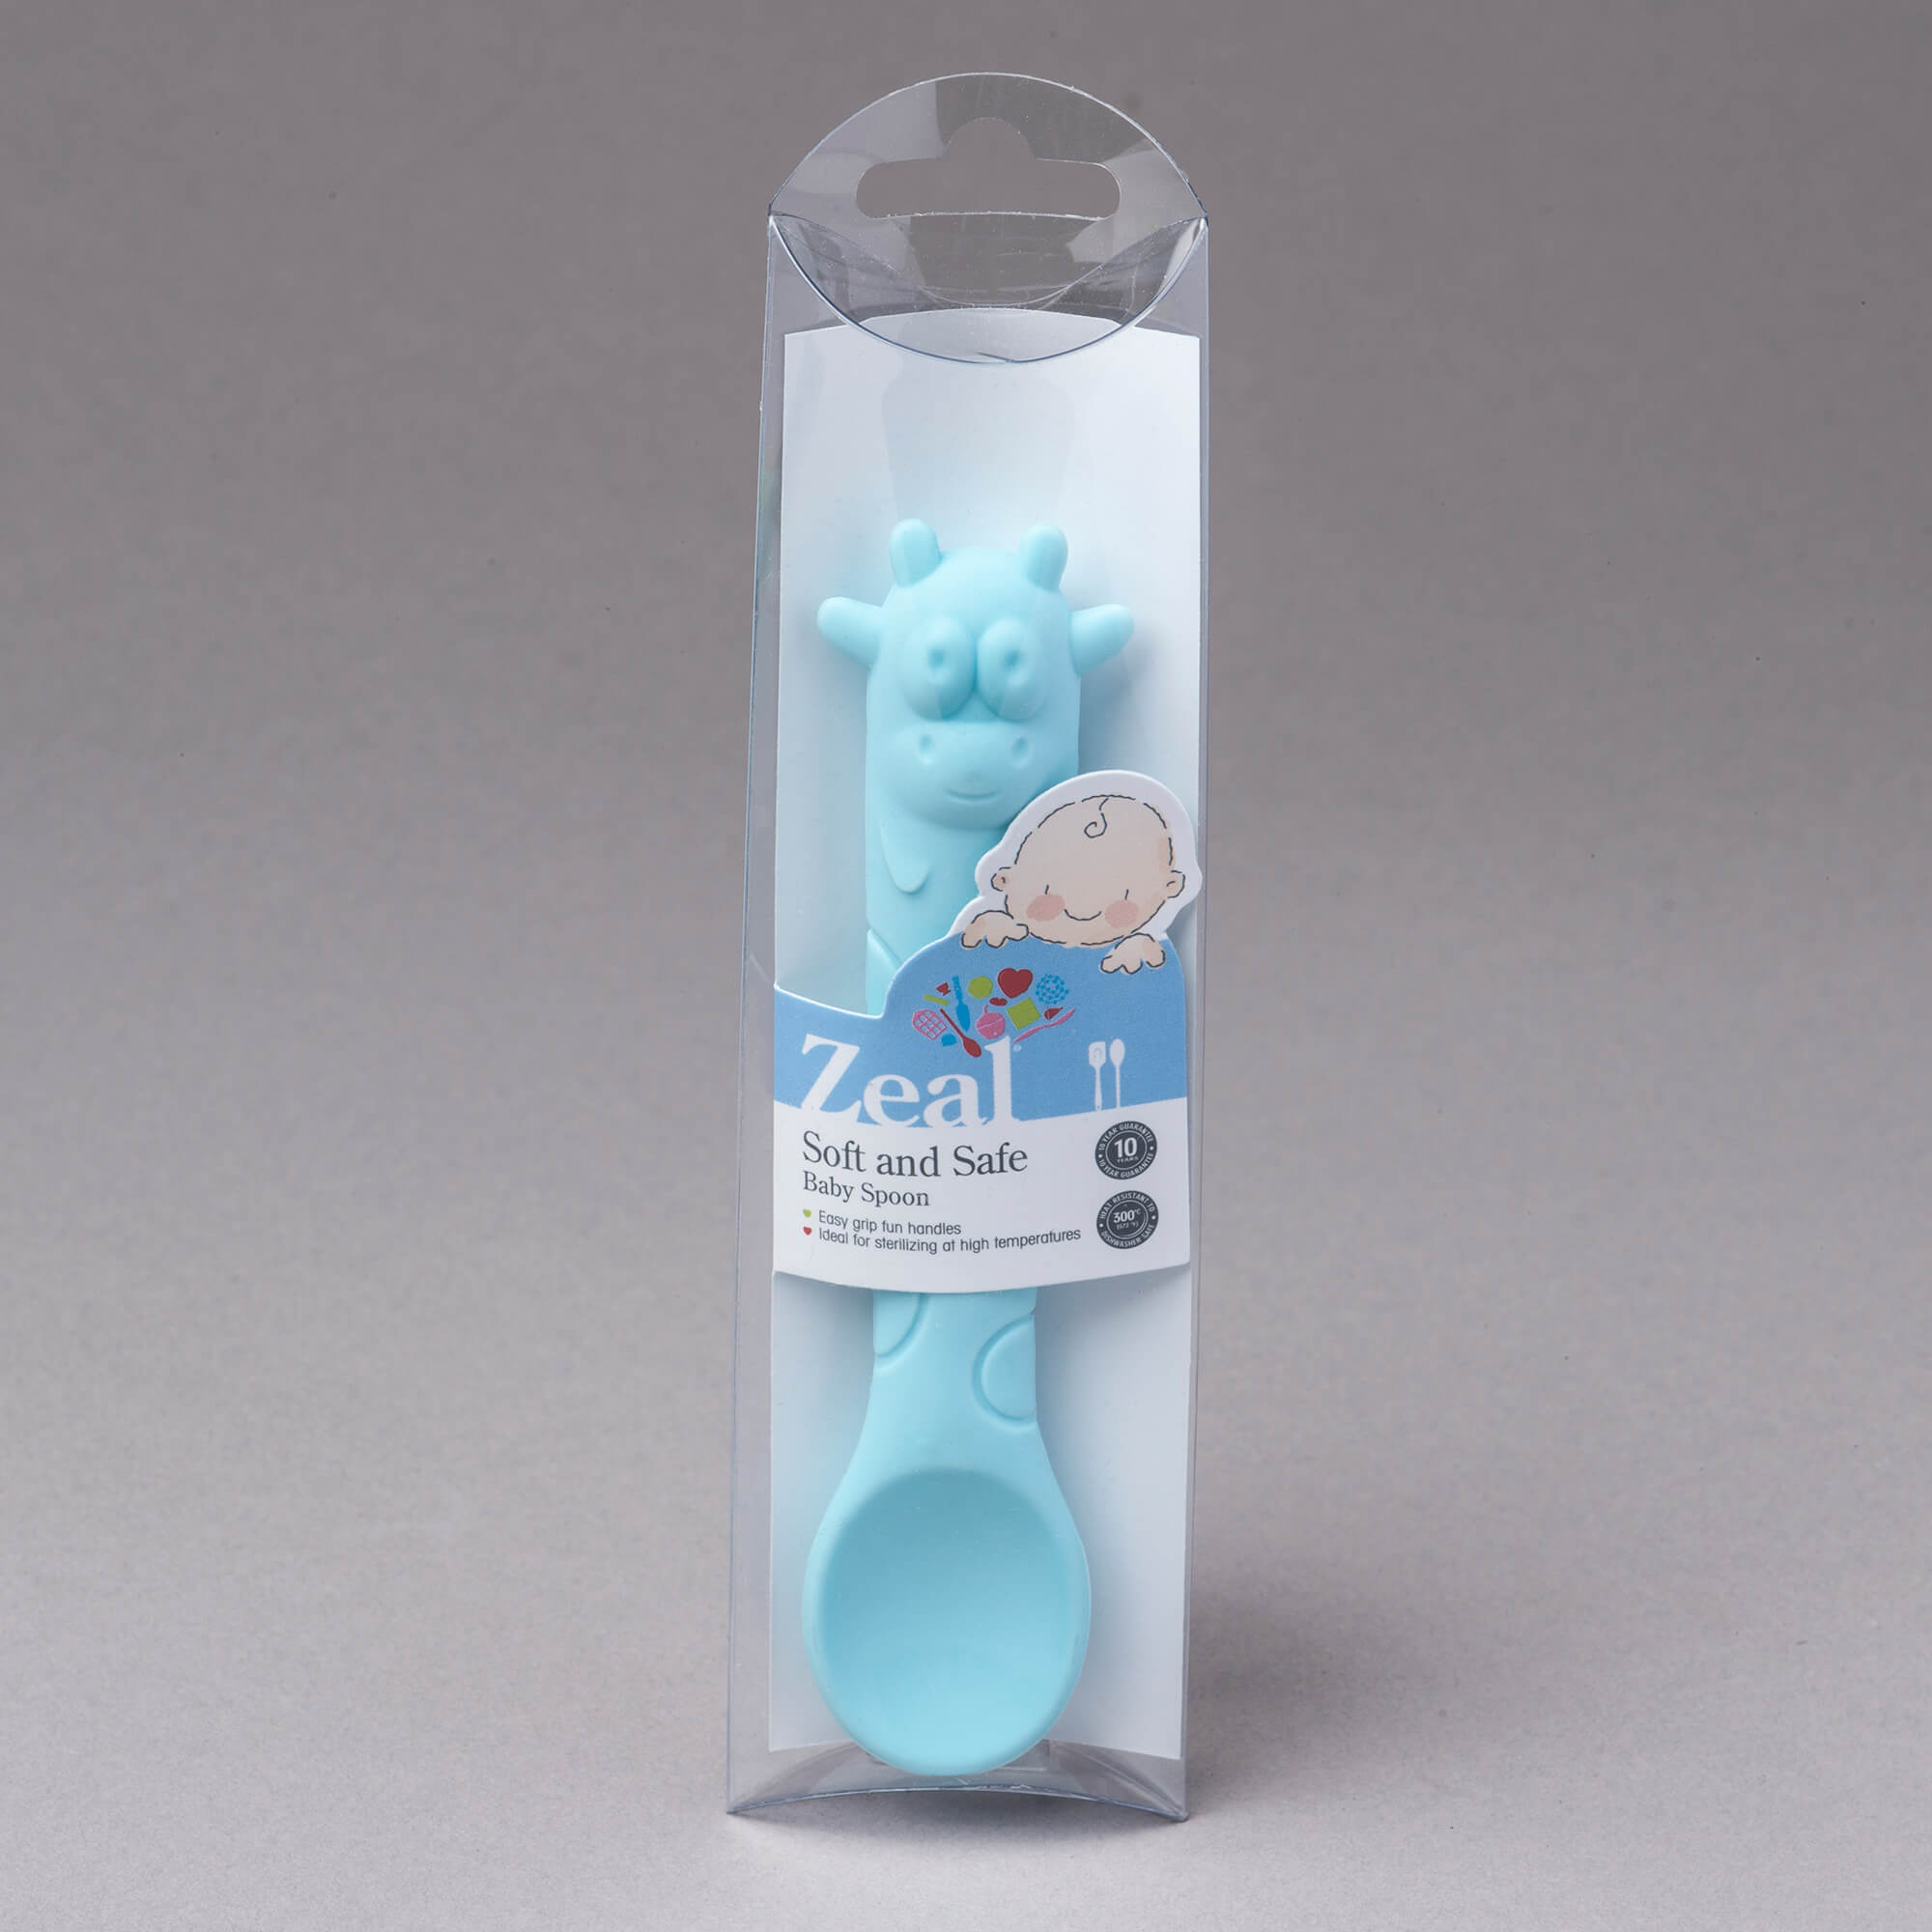 Zeal Silicone Cow Baby Spoon in packaging